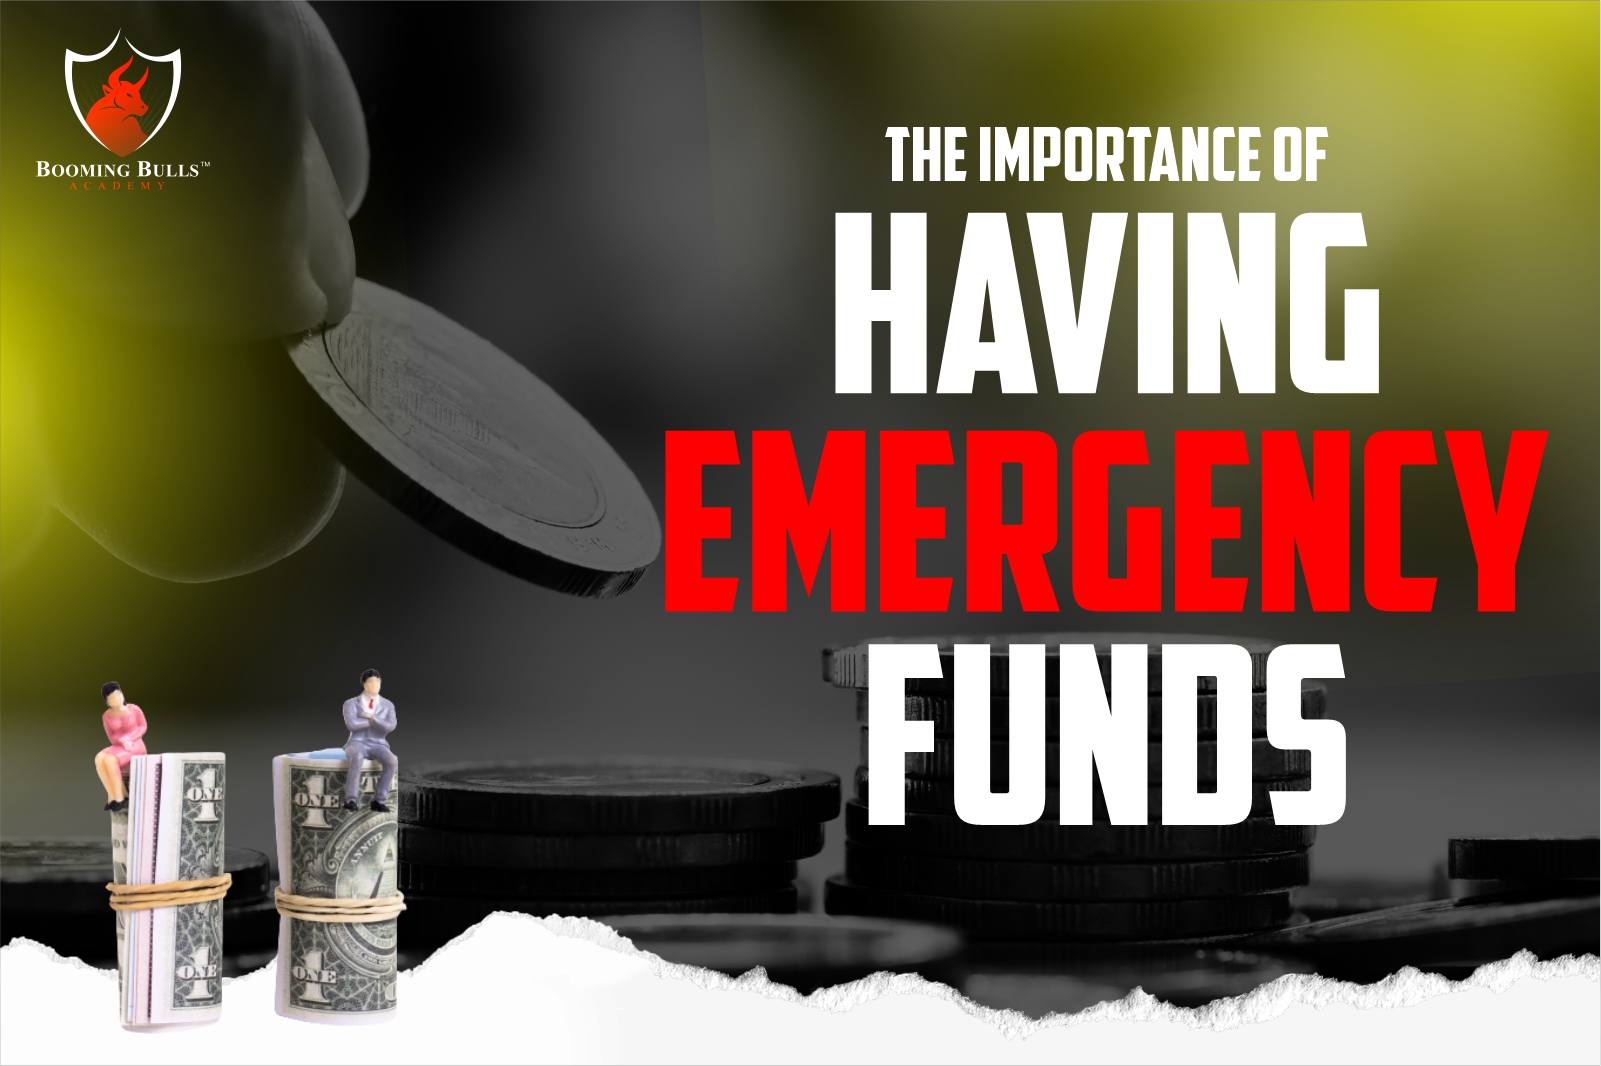 The Importance of Having Emergency Funds